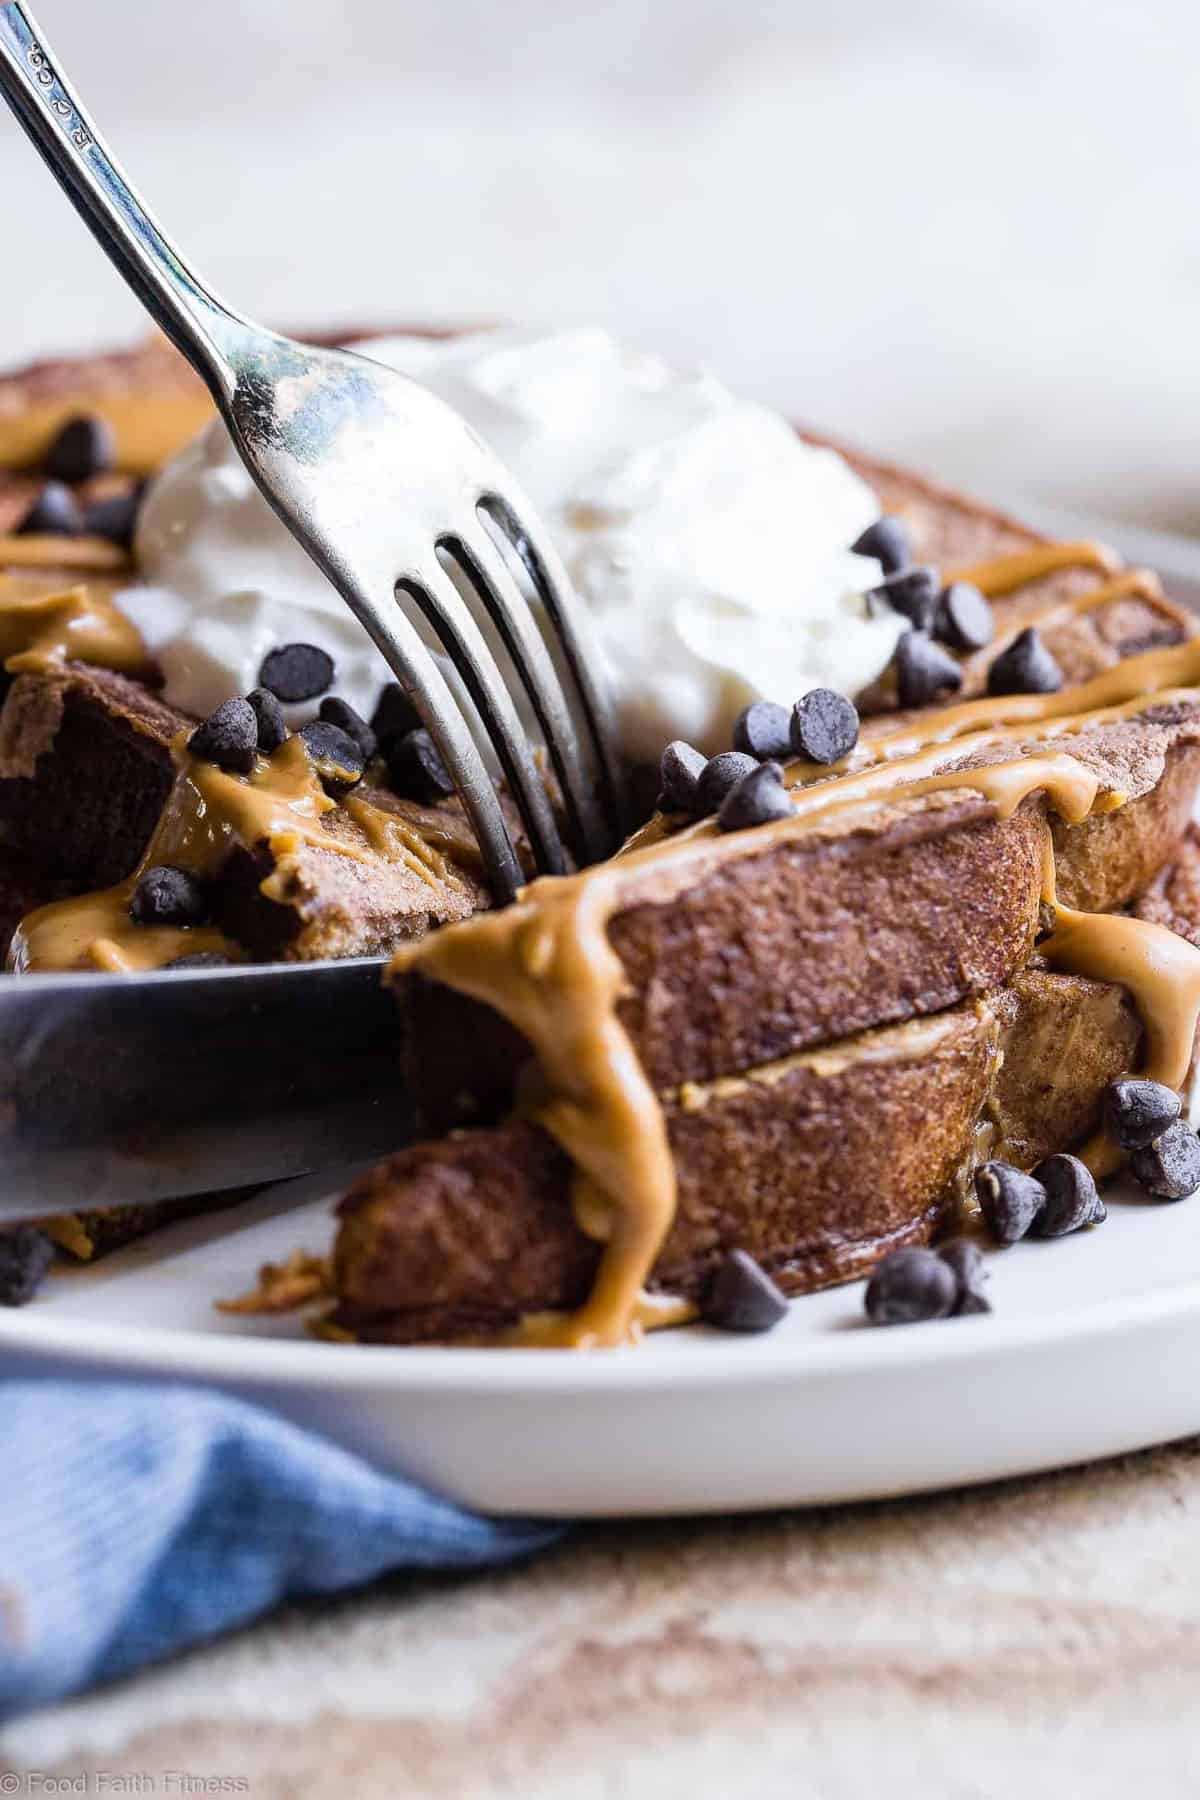 Chocolate Peanut Butter Protein French Toast - Loaded with chocolate peanut butter goodness and 32g of protein! SO easy to make and has a gluten free and paleo friendly option! Your new favorite breakfast to keep you FULL! | #Foodfaithfitness | #Glutenfree #Healthy #Paleo #Breakfast #FrenchToast